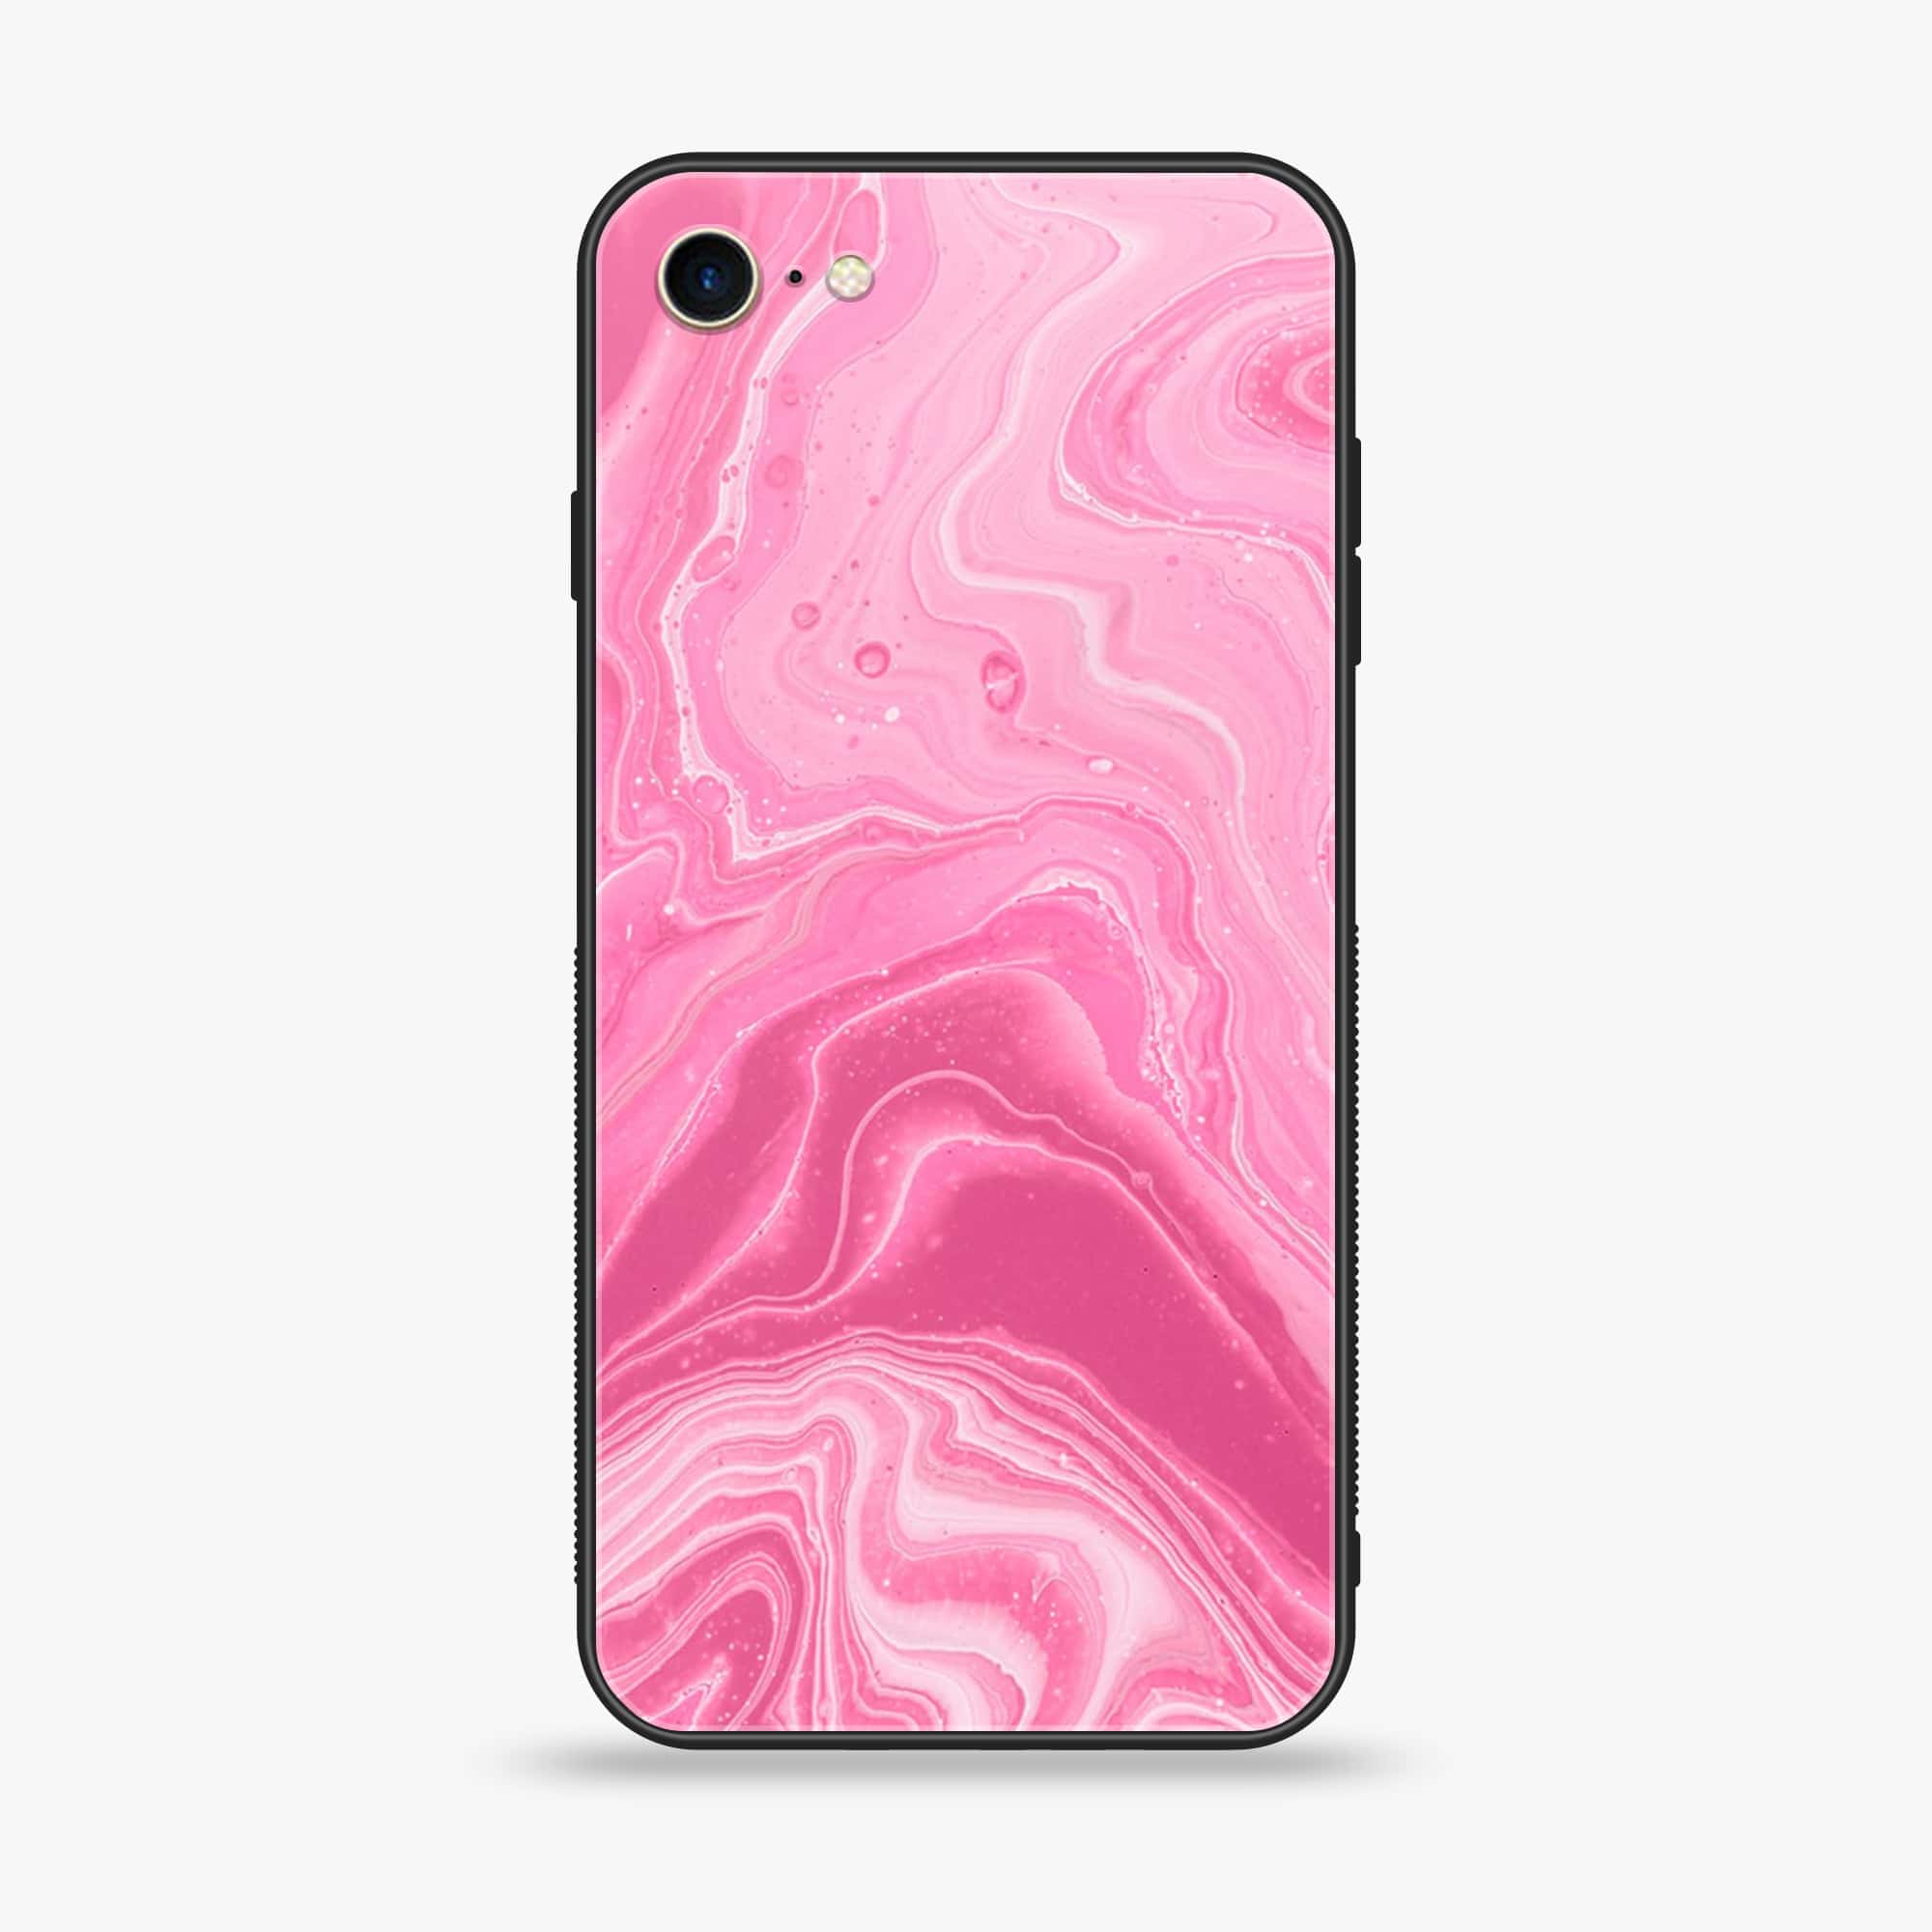 iPhone 8- Pink Marble Series - Premium Printed Glass soft Bumper shock Proof Case